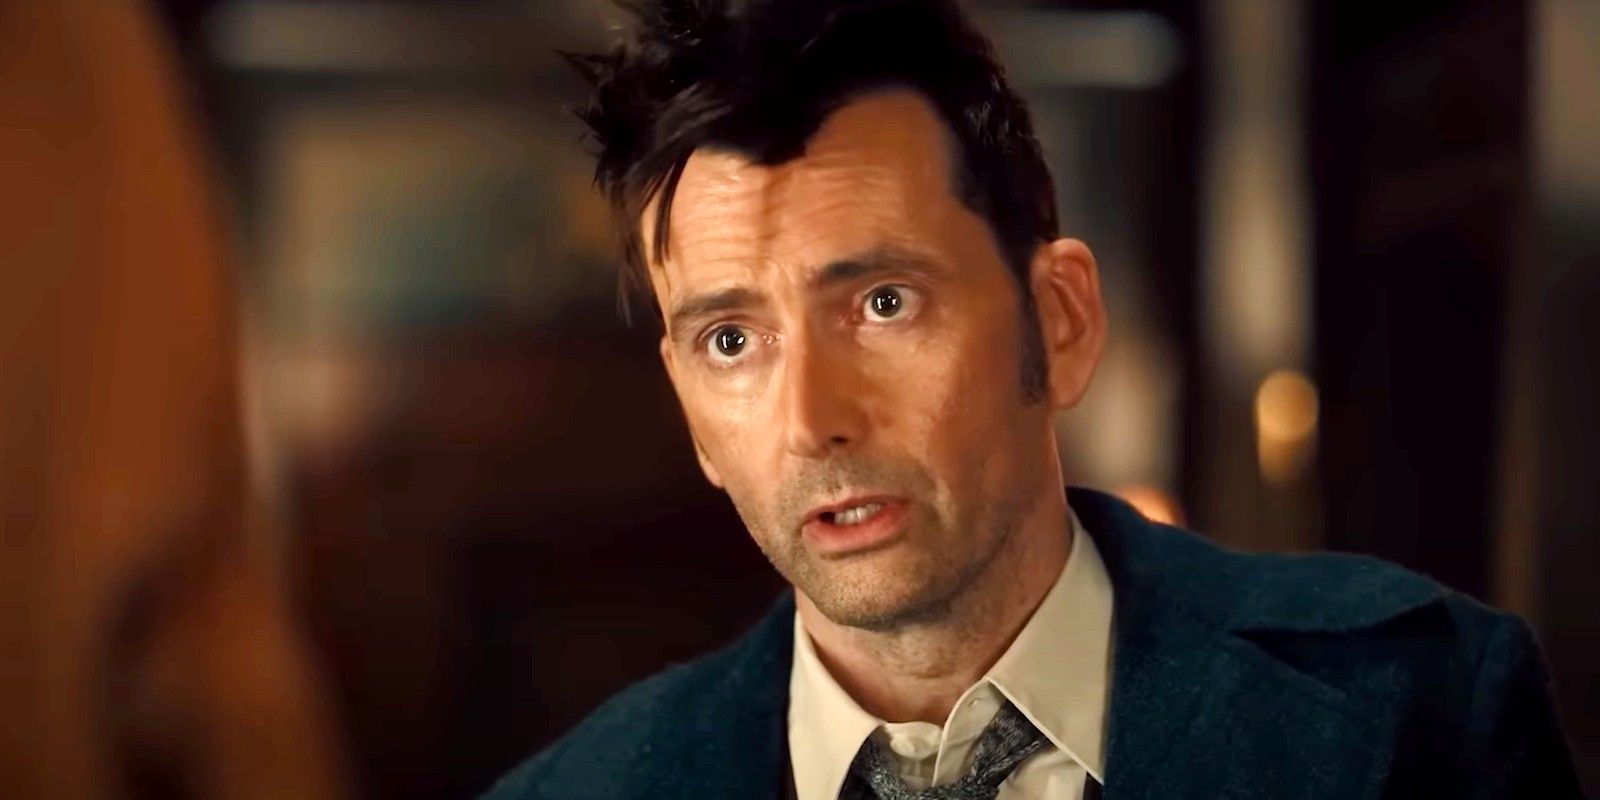 David Tennant's Doctor talking to Donna in Doctor Who 60th anniversary trailer